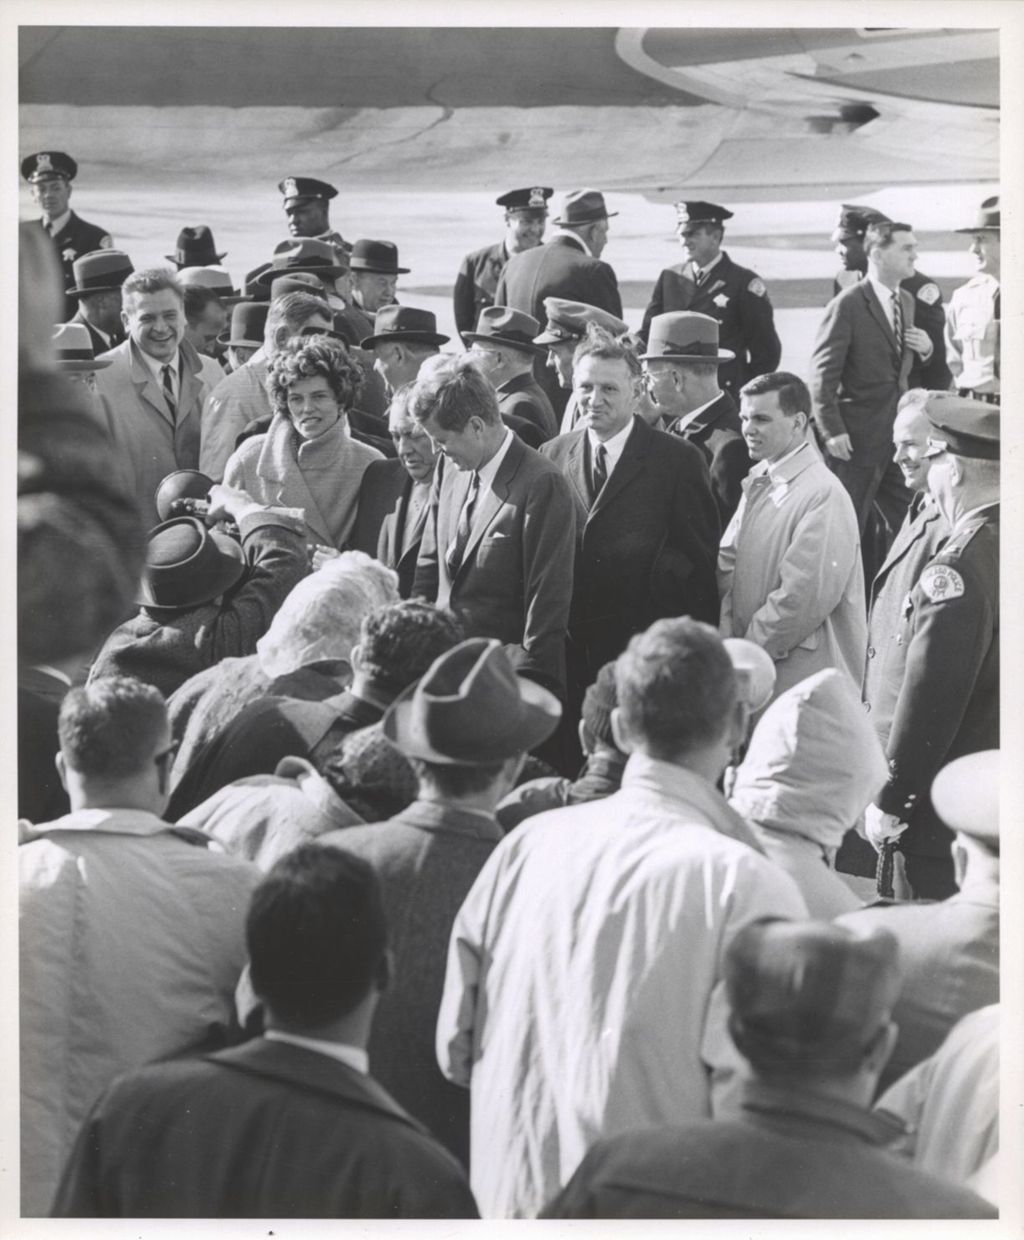 Eunice Kennedy Shriver, Richard J. Daley, John F. Kennedy and others at O'Hare